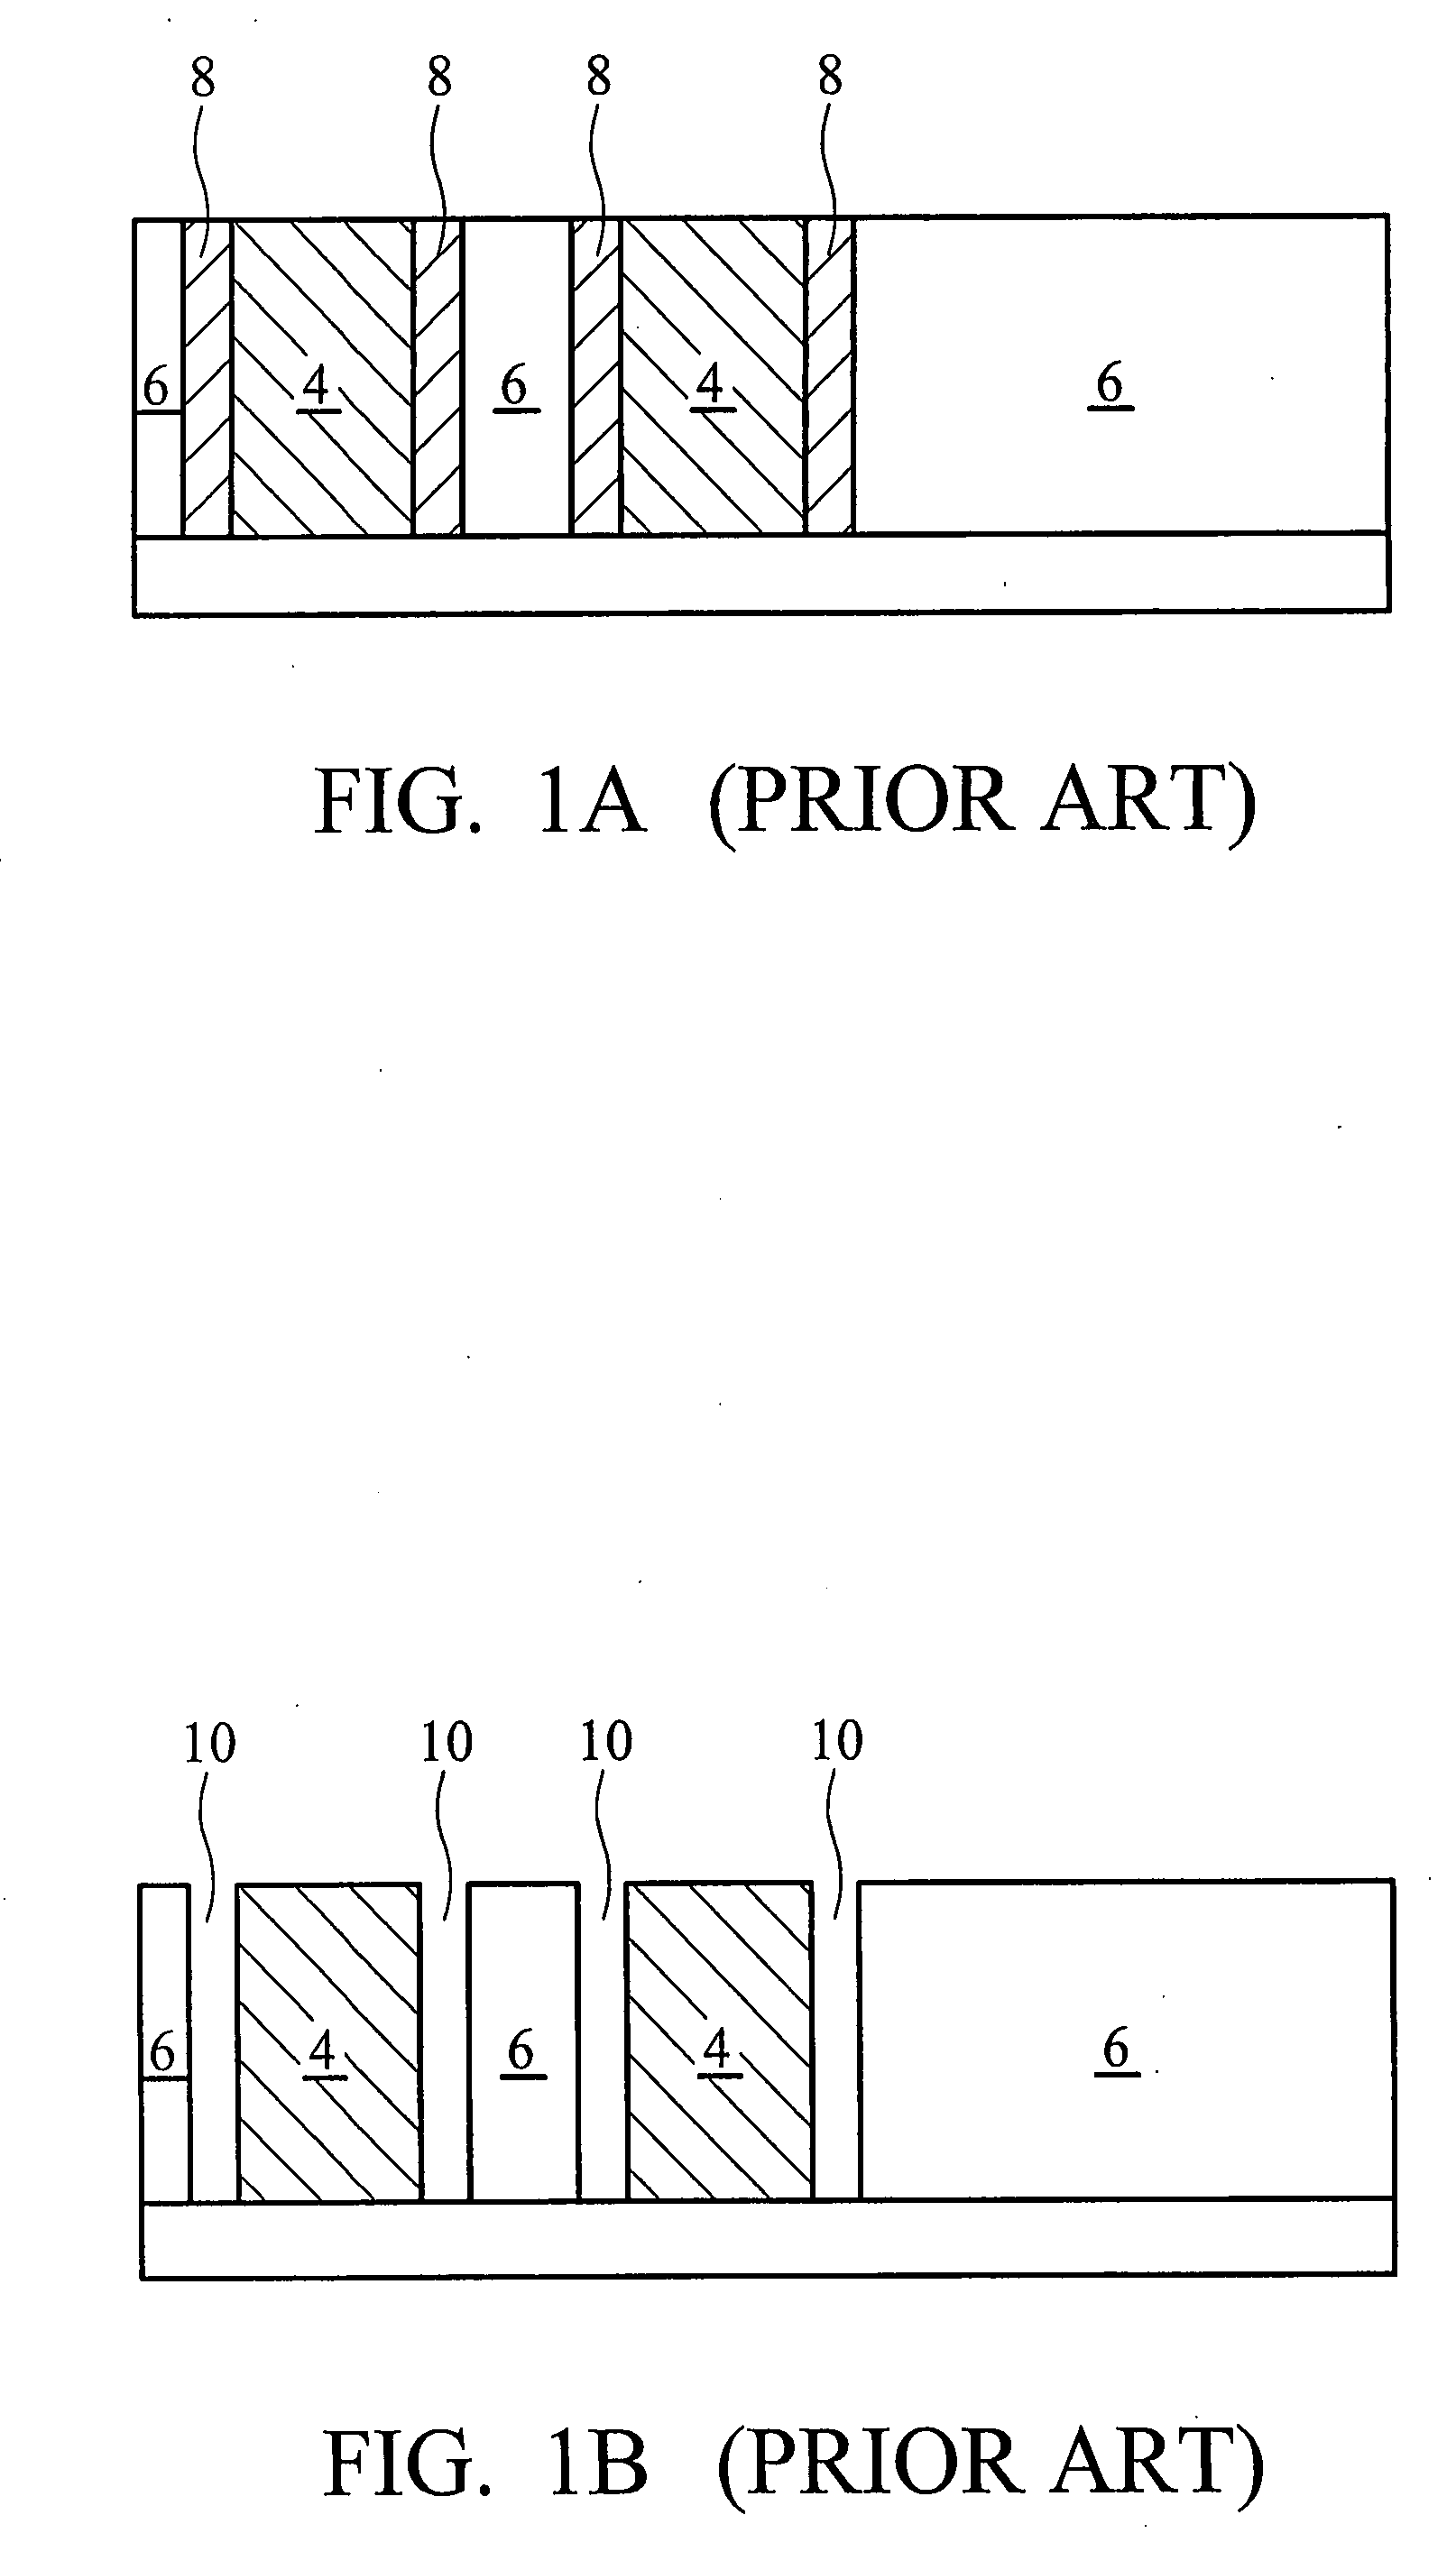 Formation process of interconnect structures with air-gaps and sidewall spacers